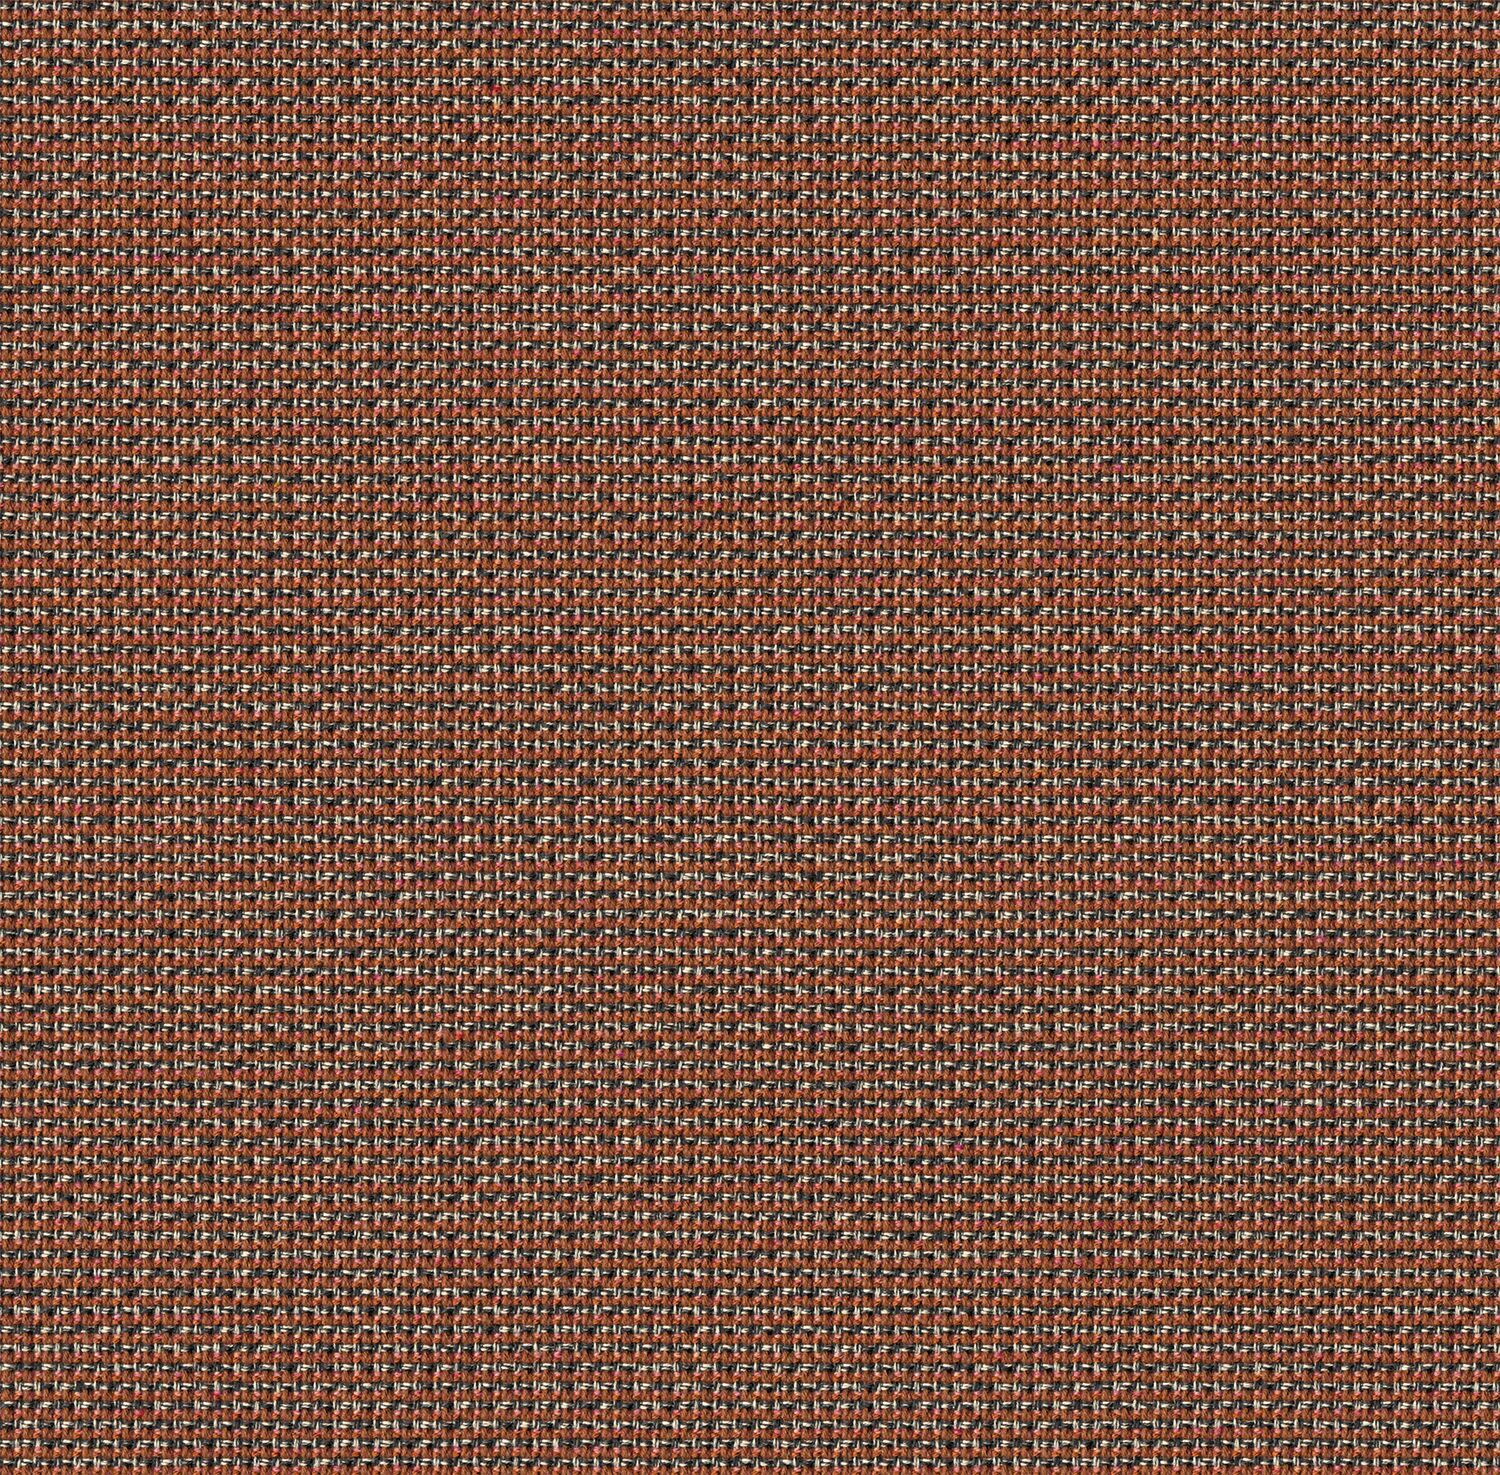 Barberpole Basket - Copper Coil - 4114 - 08 Tileable Swatches